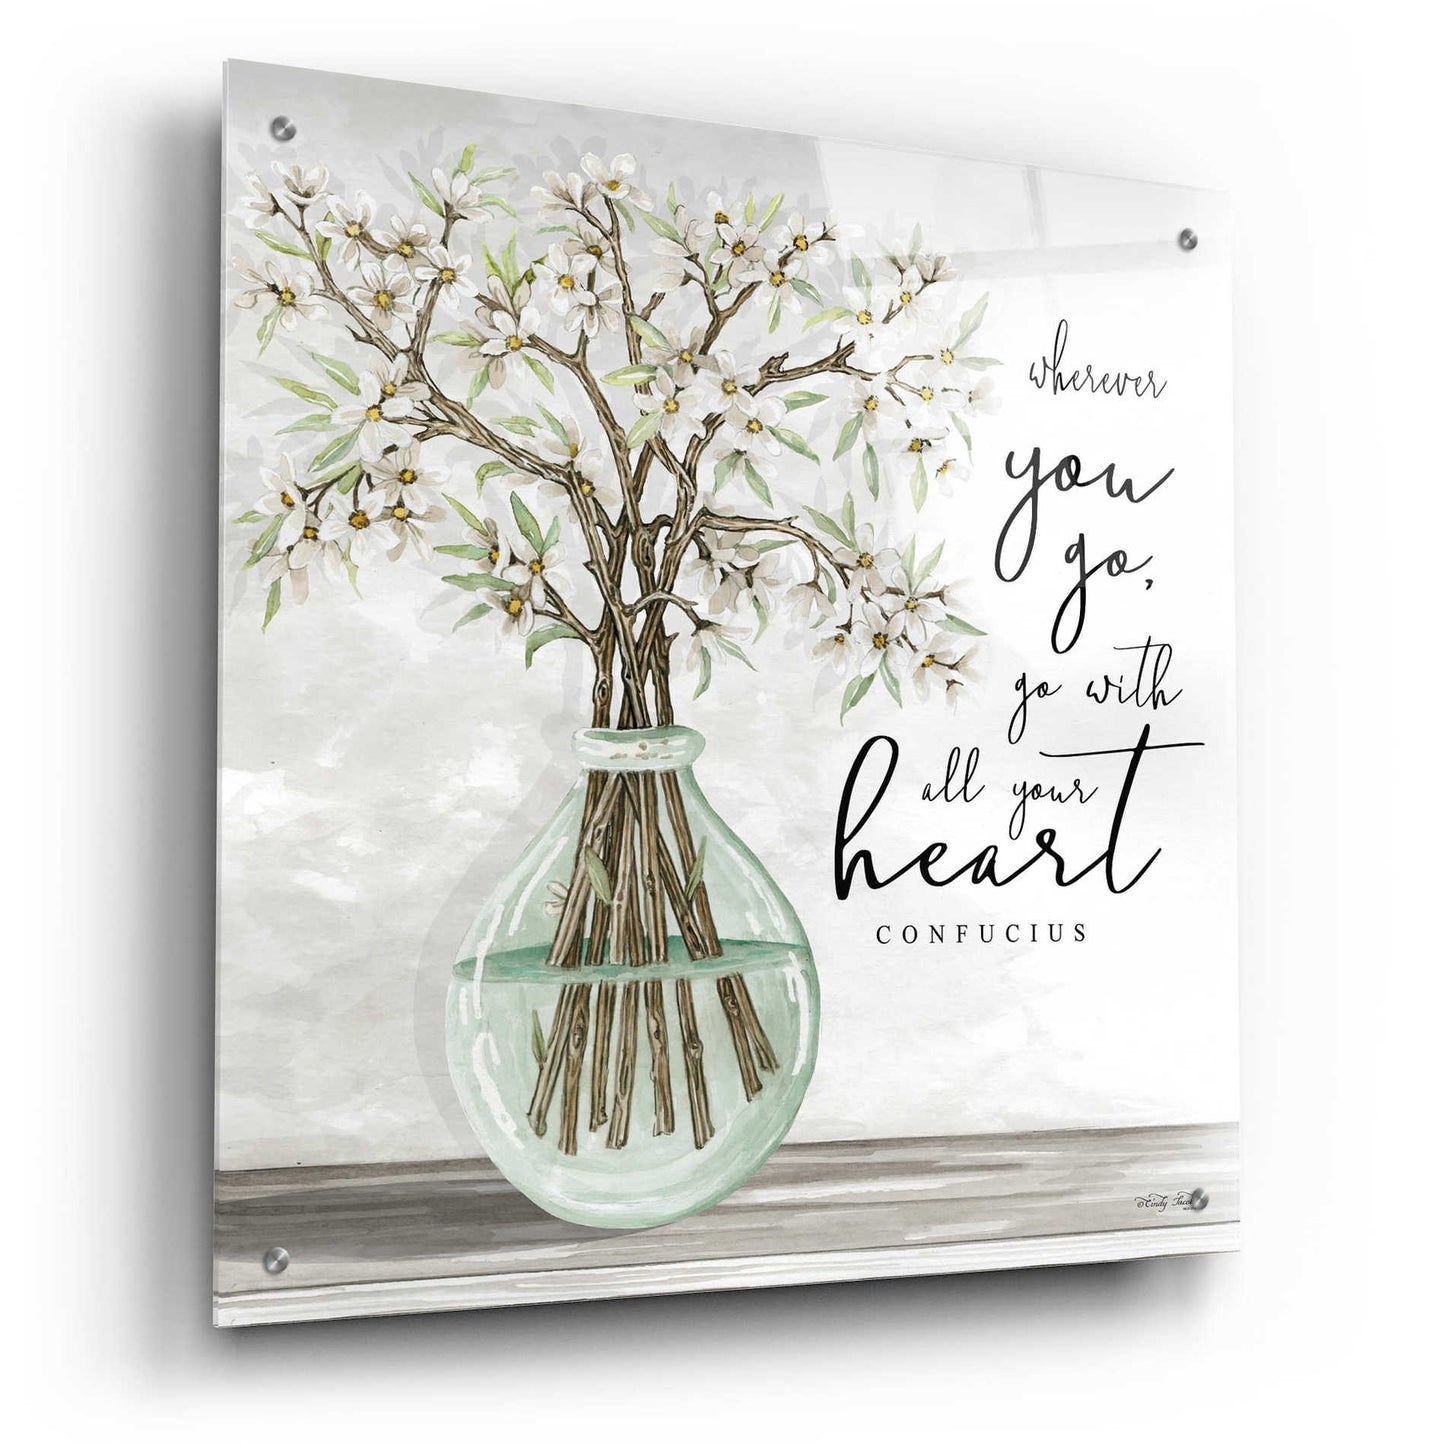 Epic Art 'Go With All Your Heart' by Cindy Jacobs, Acrylic Glass Wall Art,24x24